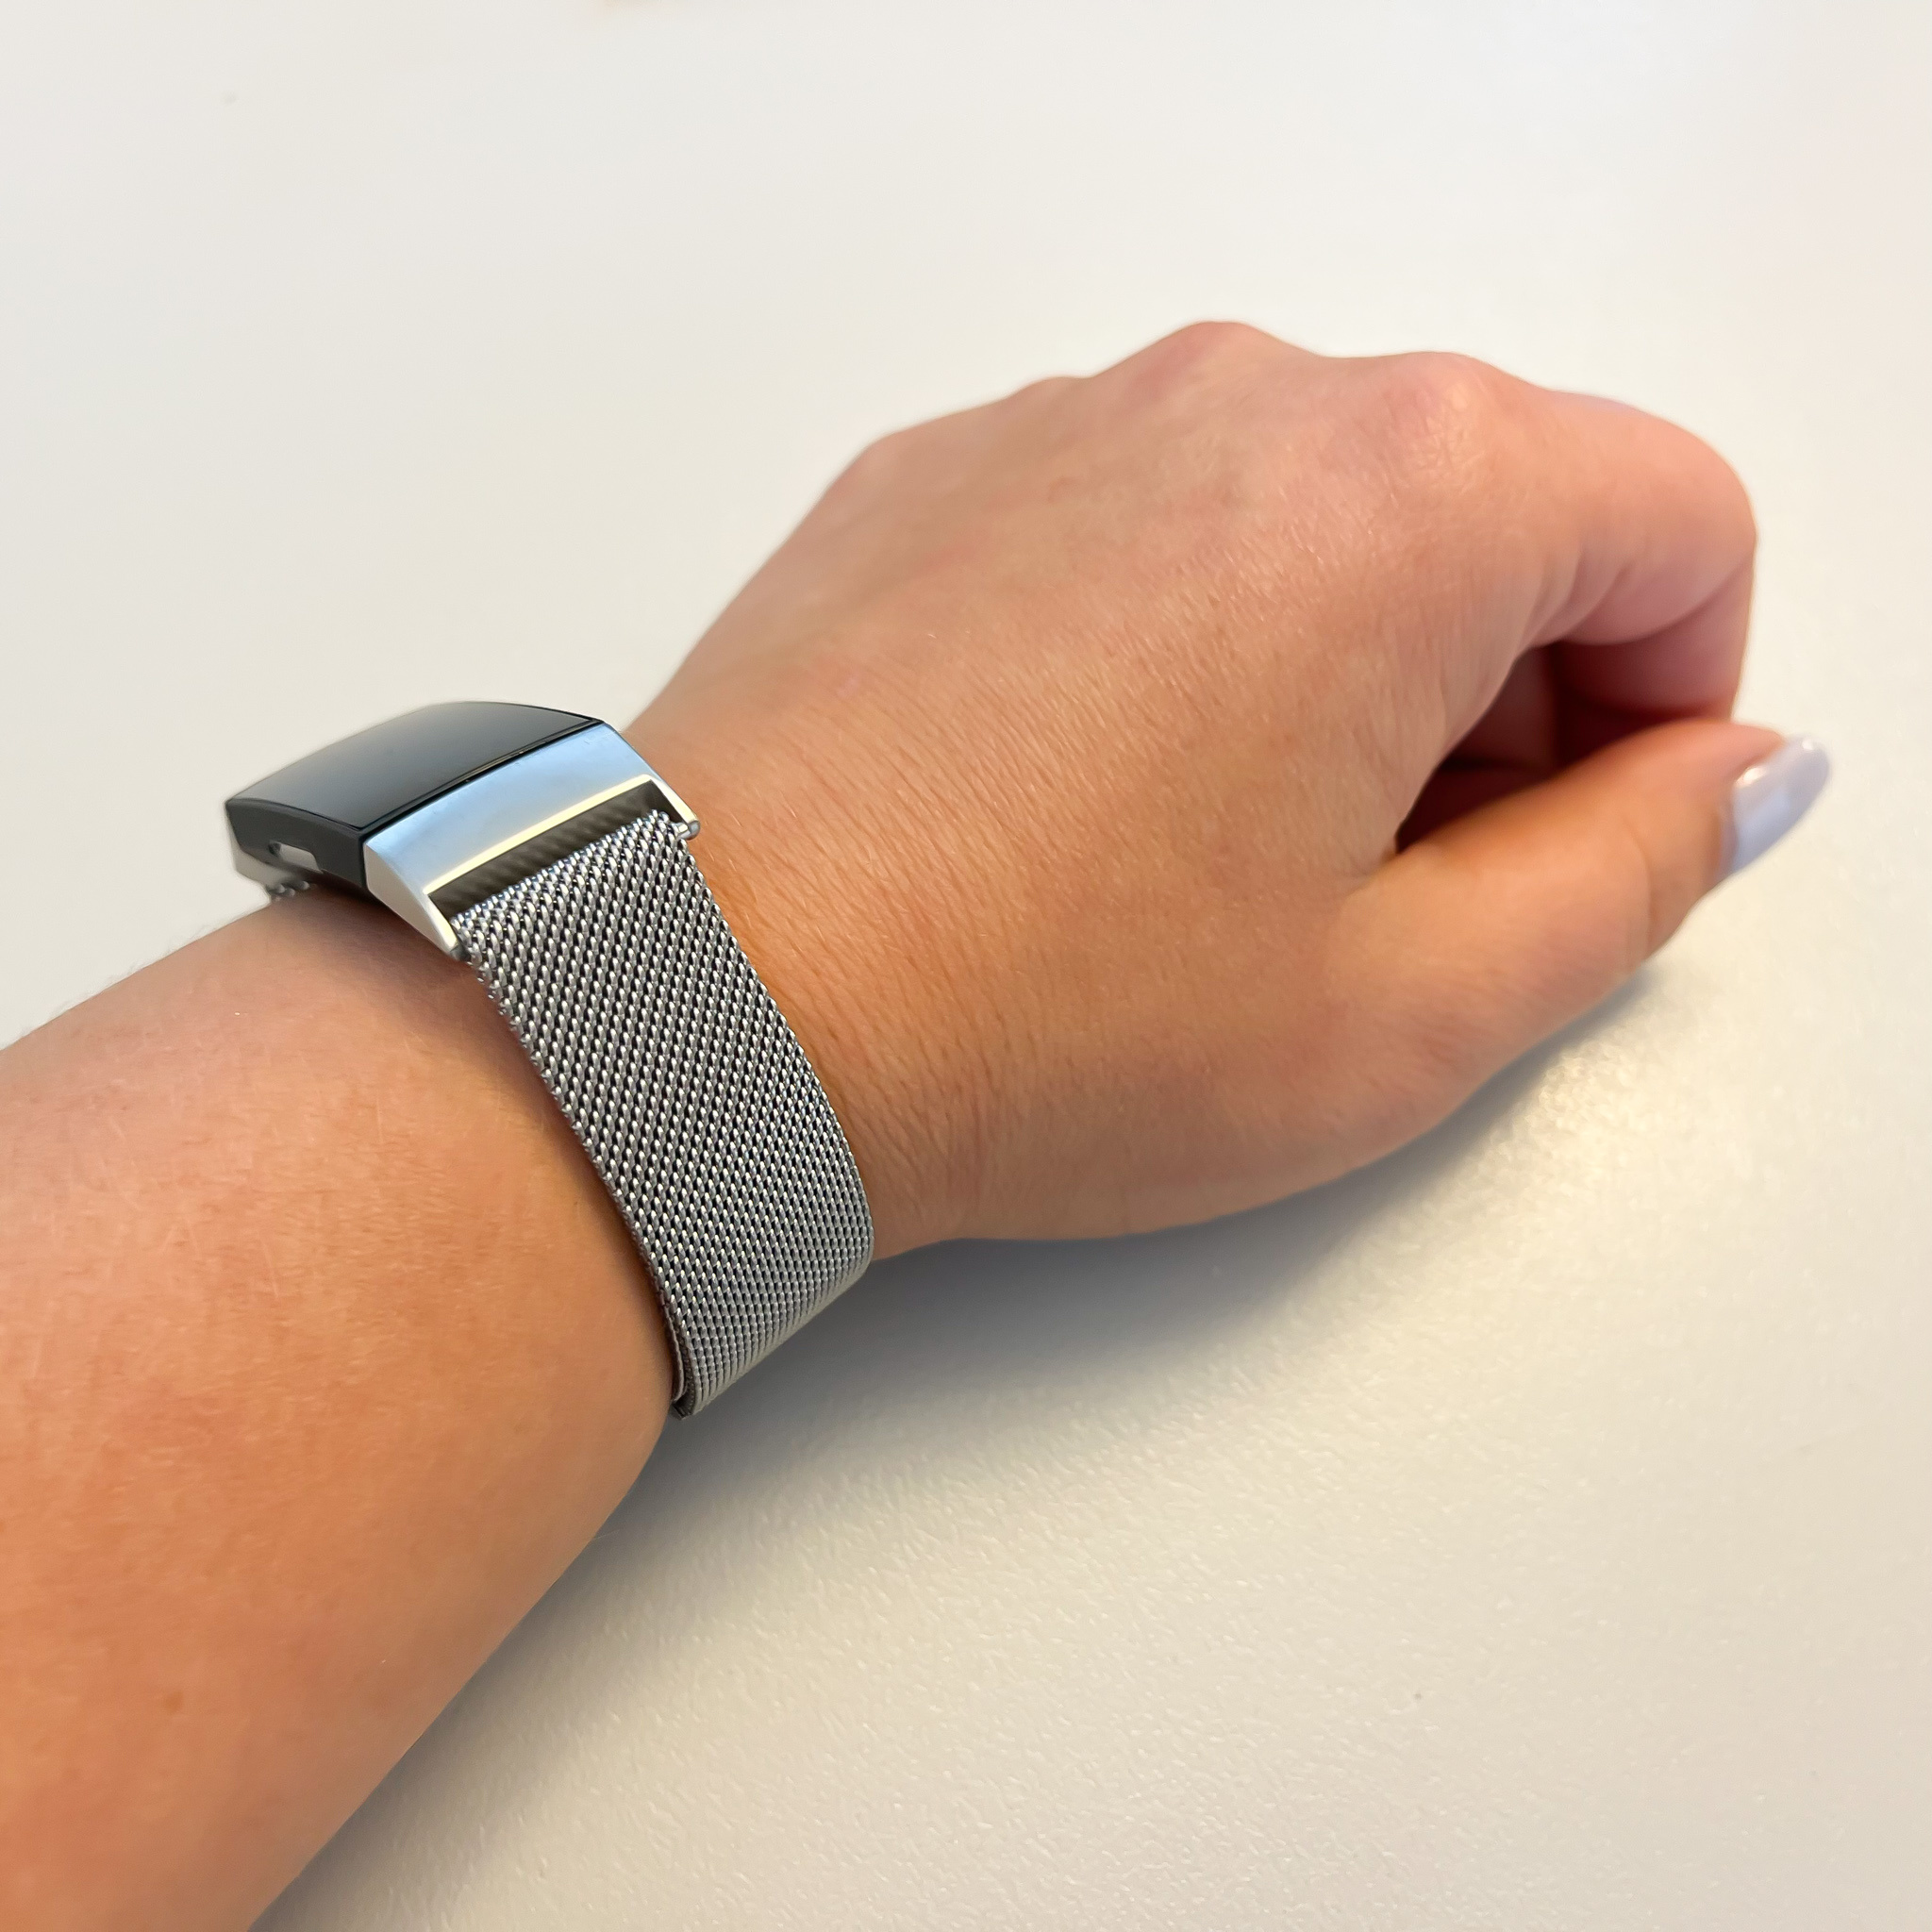 Fitbit Charge 3 & 4 milanese band - zilver